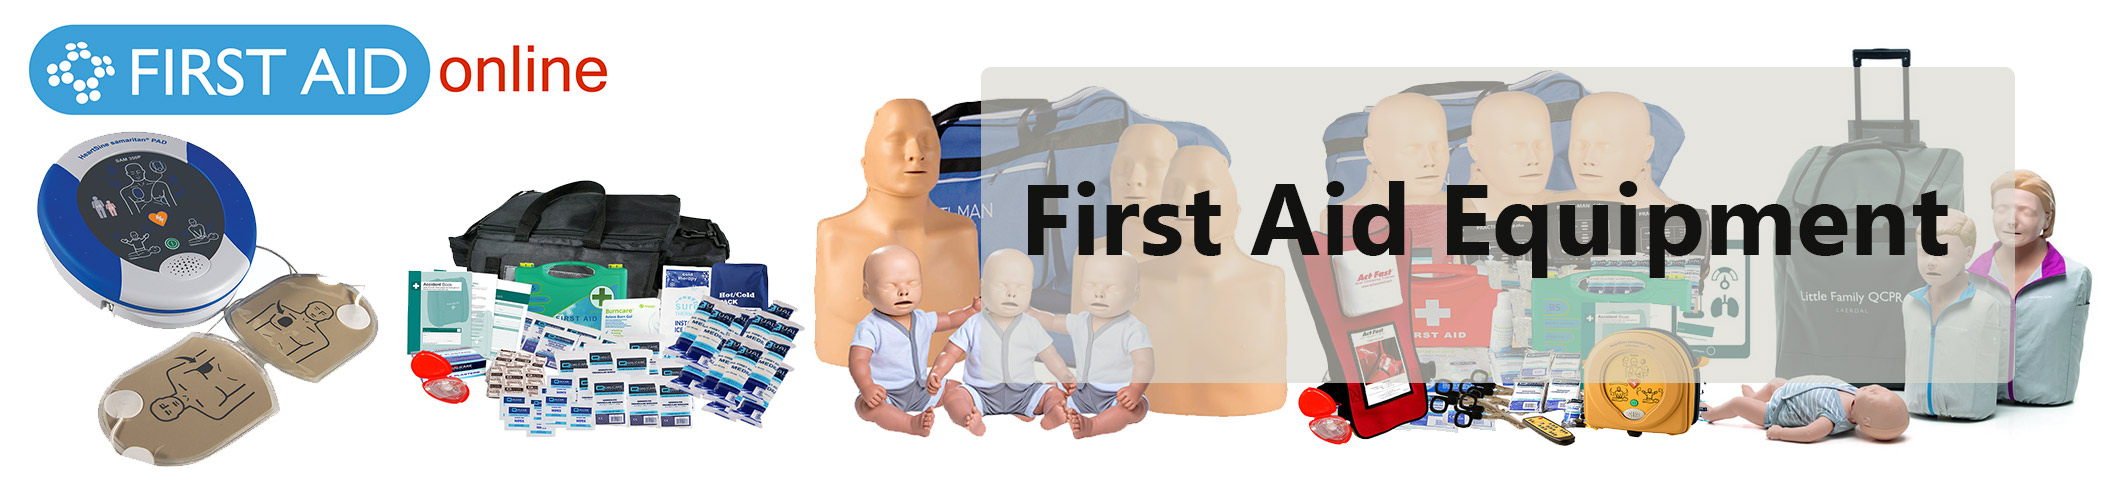 first aid instructor equipment banner